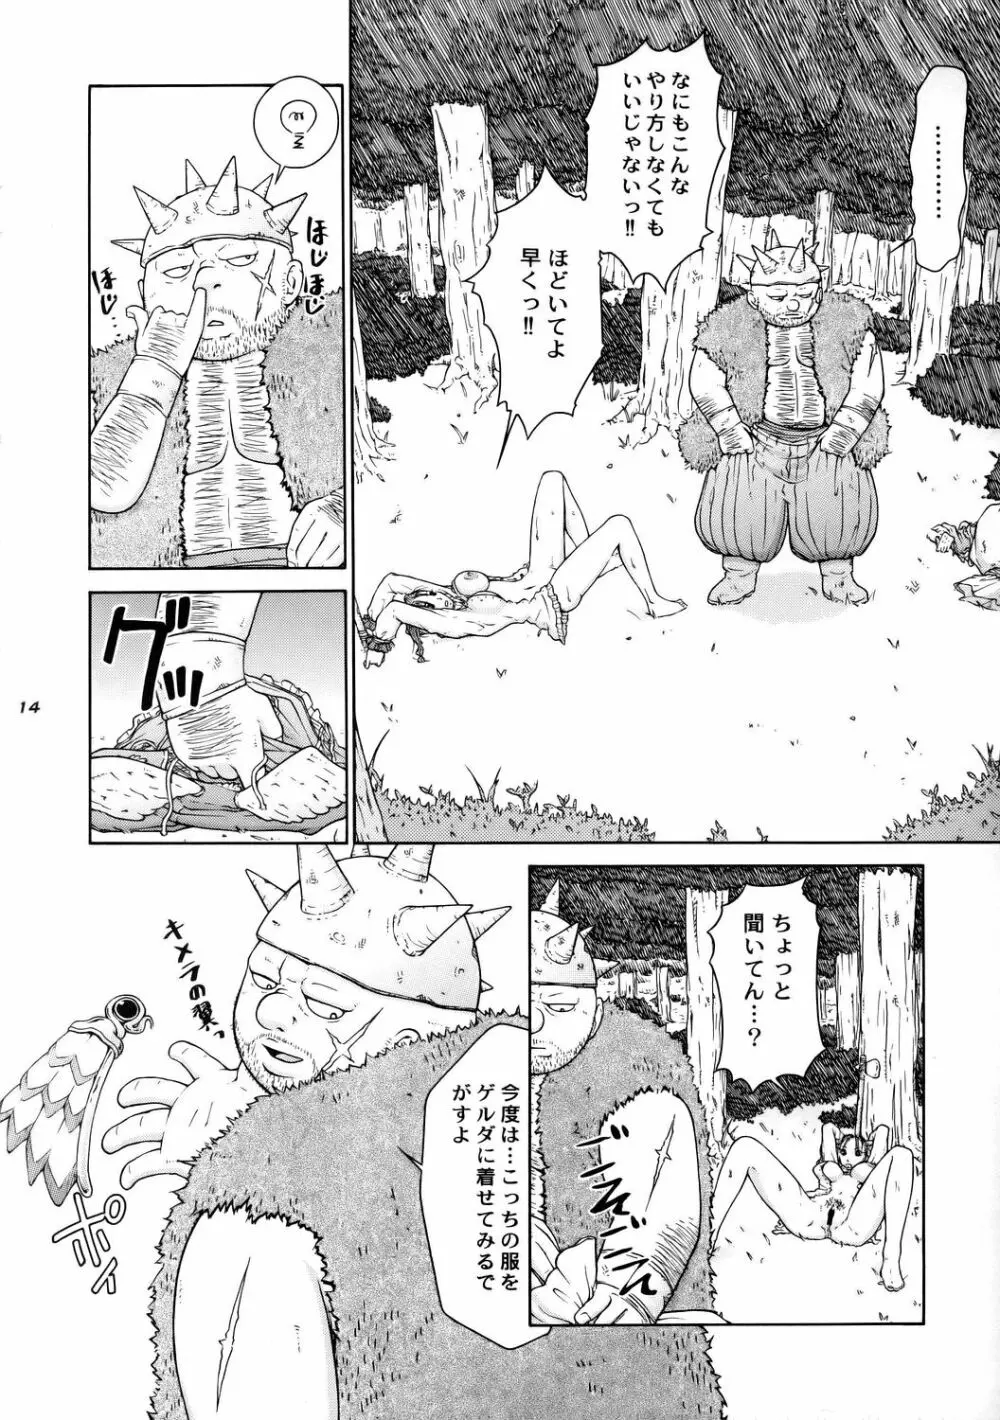 TWT 4 Page.13